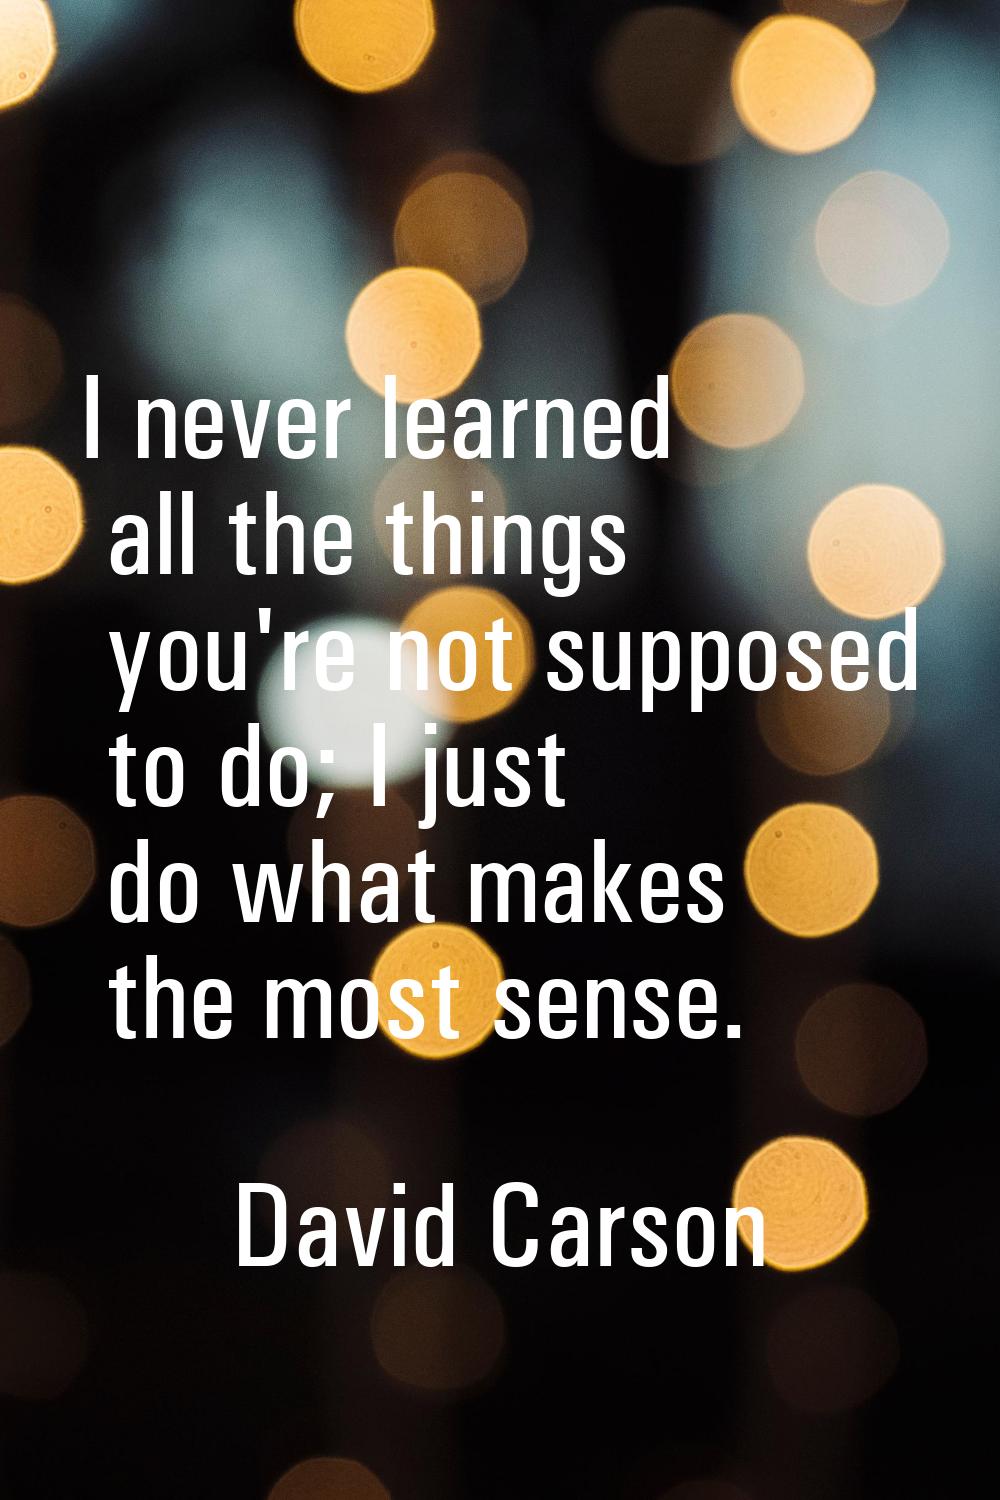 I never learned all the things you're not supposed to do; I just do what makes the most sense.